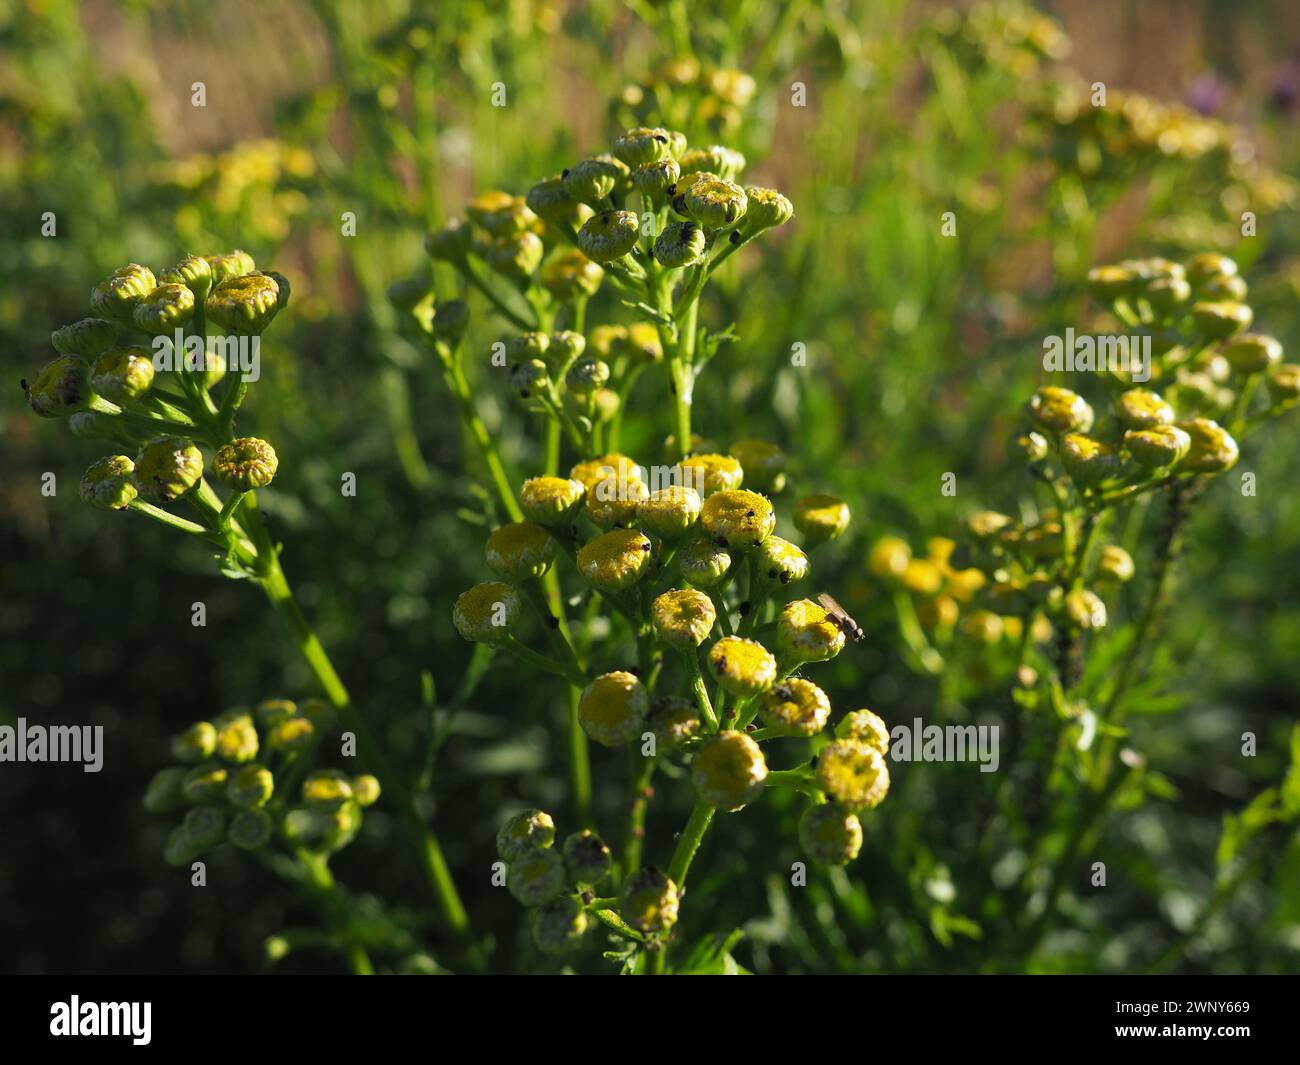 Tansy, Tanacetum, a genus of perennial herbaceous plants and shrubs of the Asteraceae family. Several tansy plants like a bouquet. Lawn with wild Stock Photo